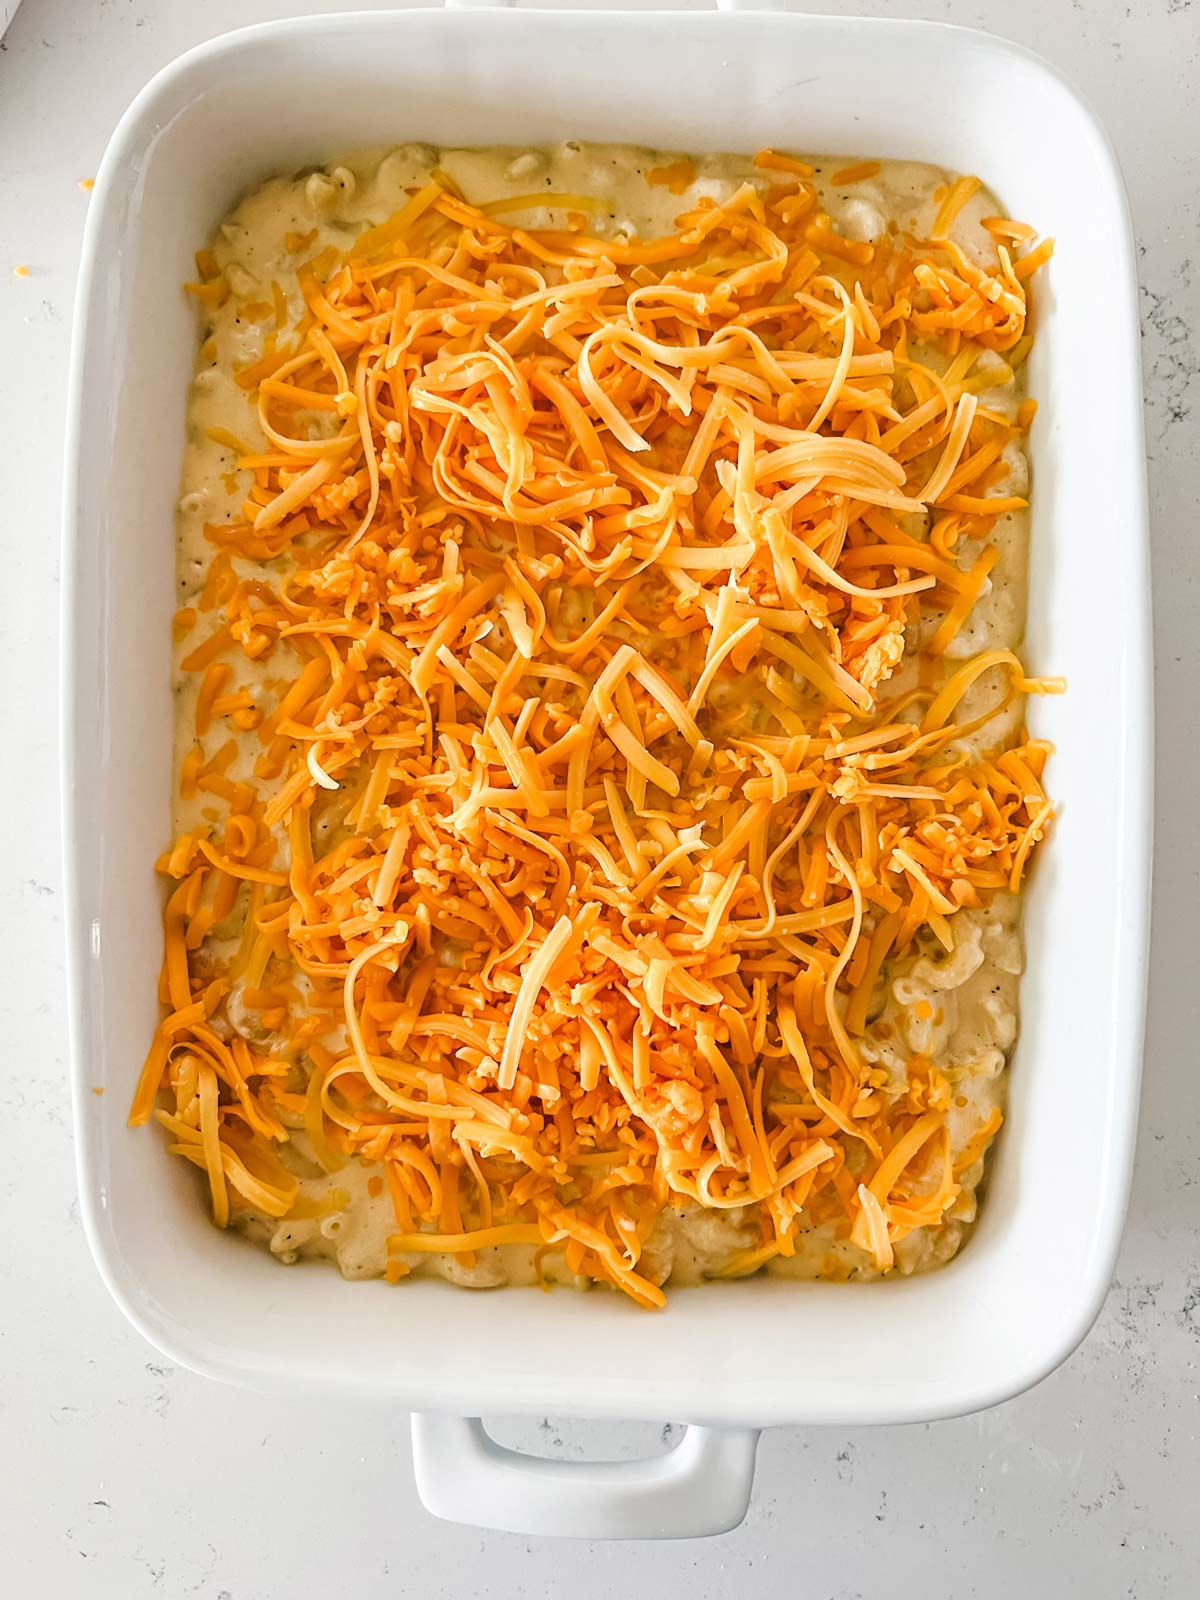 Macaroni and cheese with shredded cheese on top in a white casserole dish.